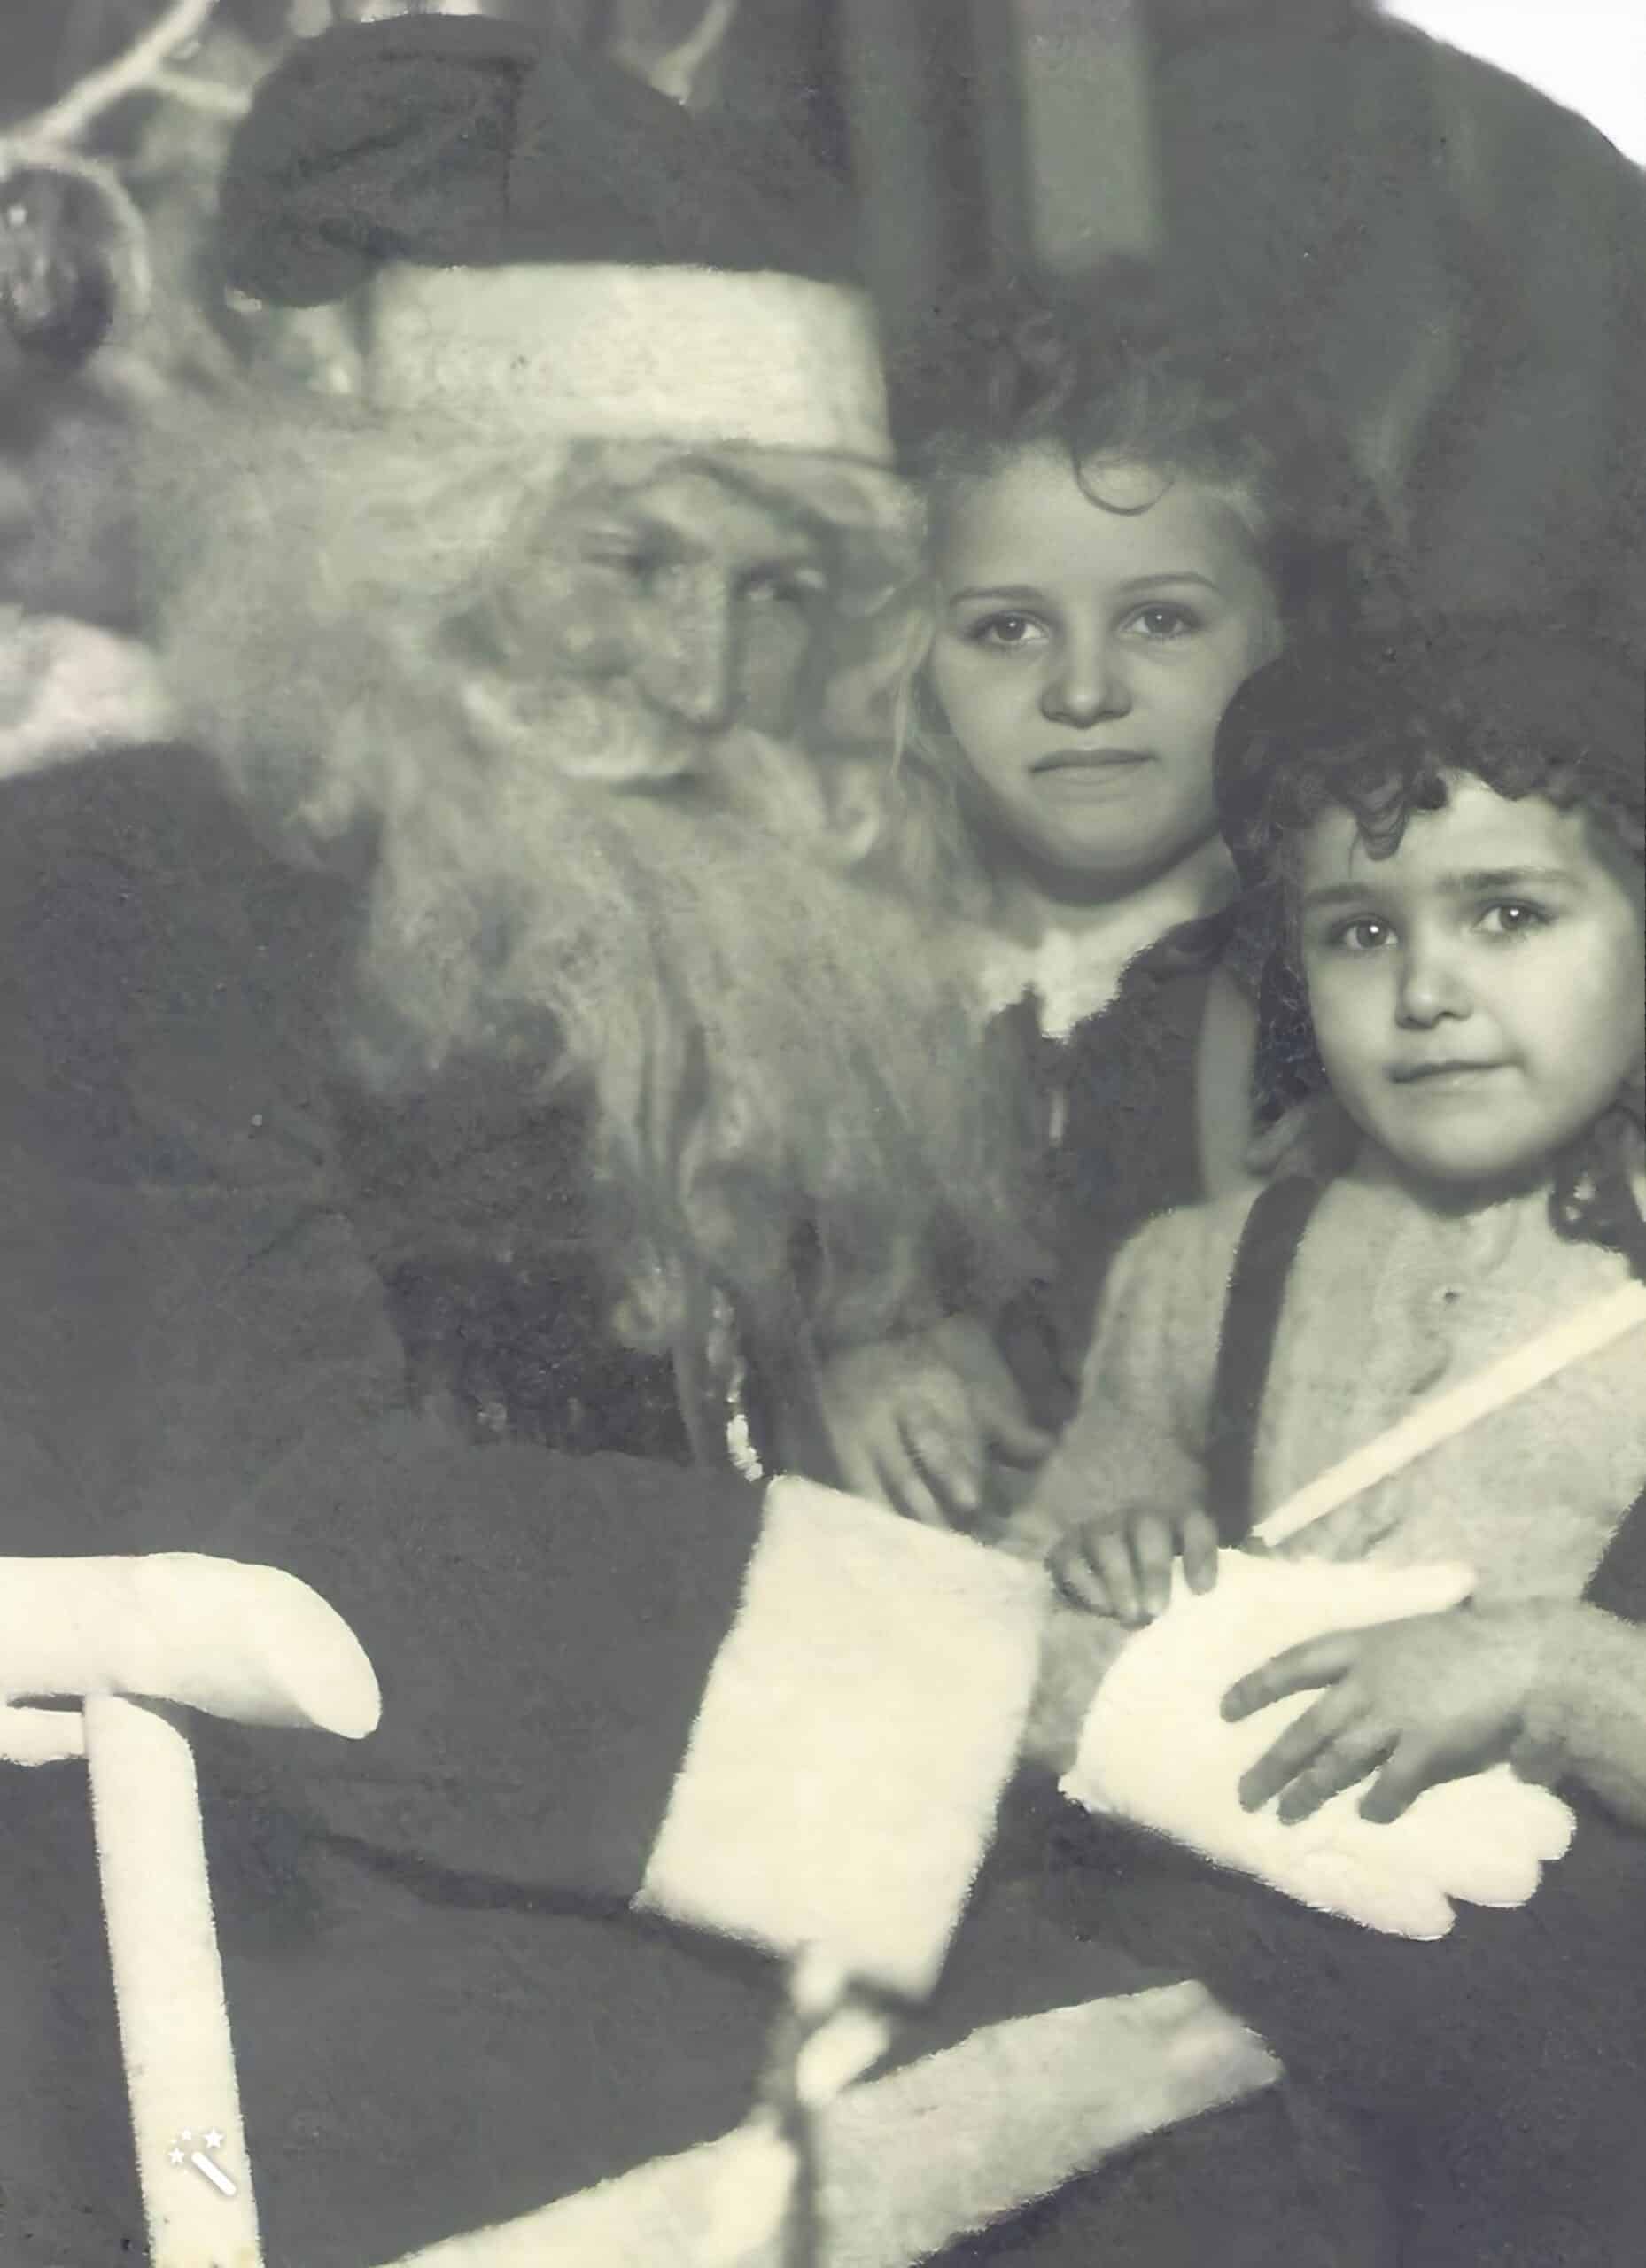 Carol and Roberta on Santa's knee. Enhanced and repaired by MyHeritage